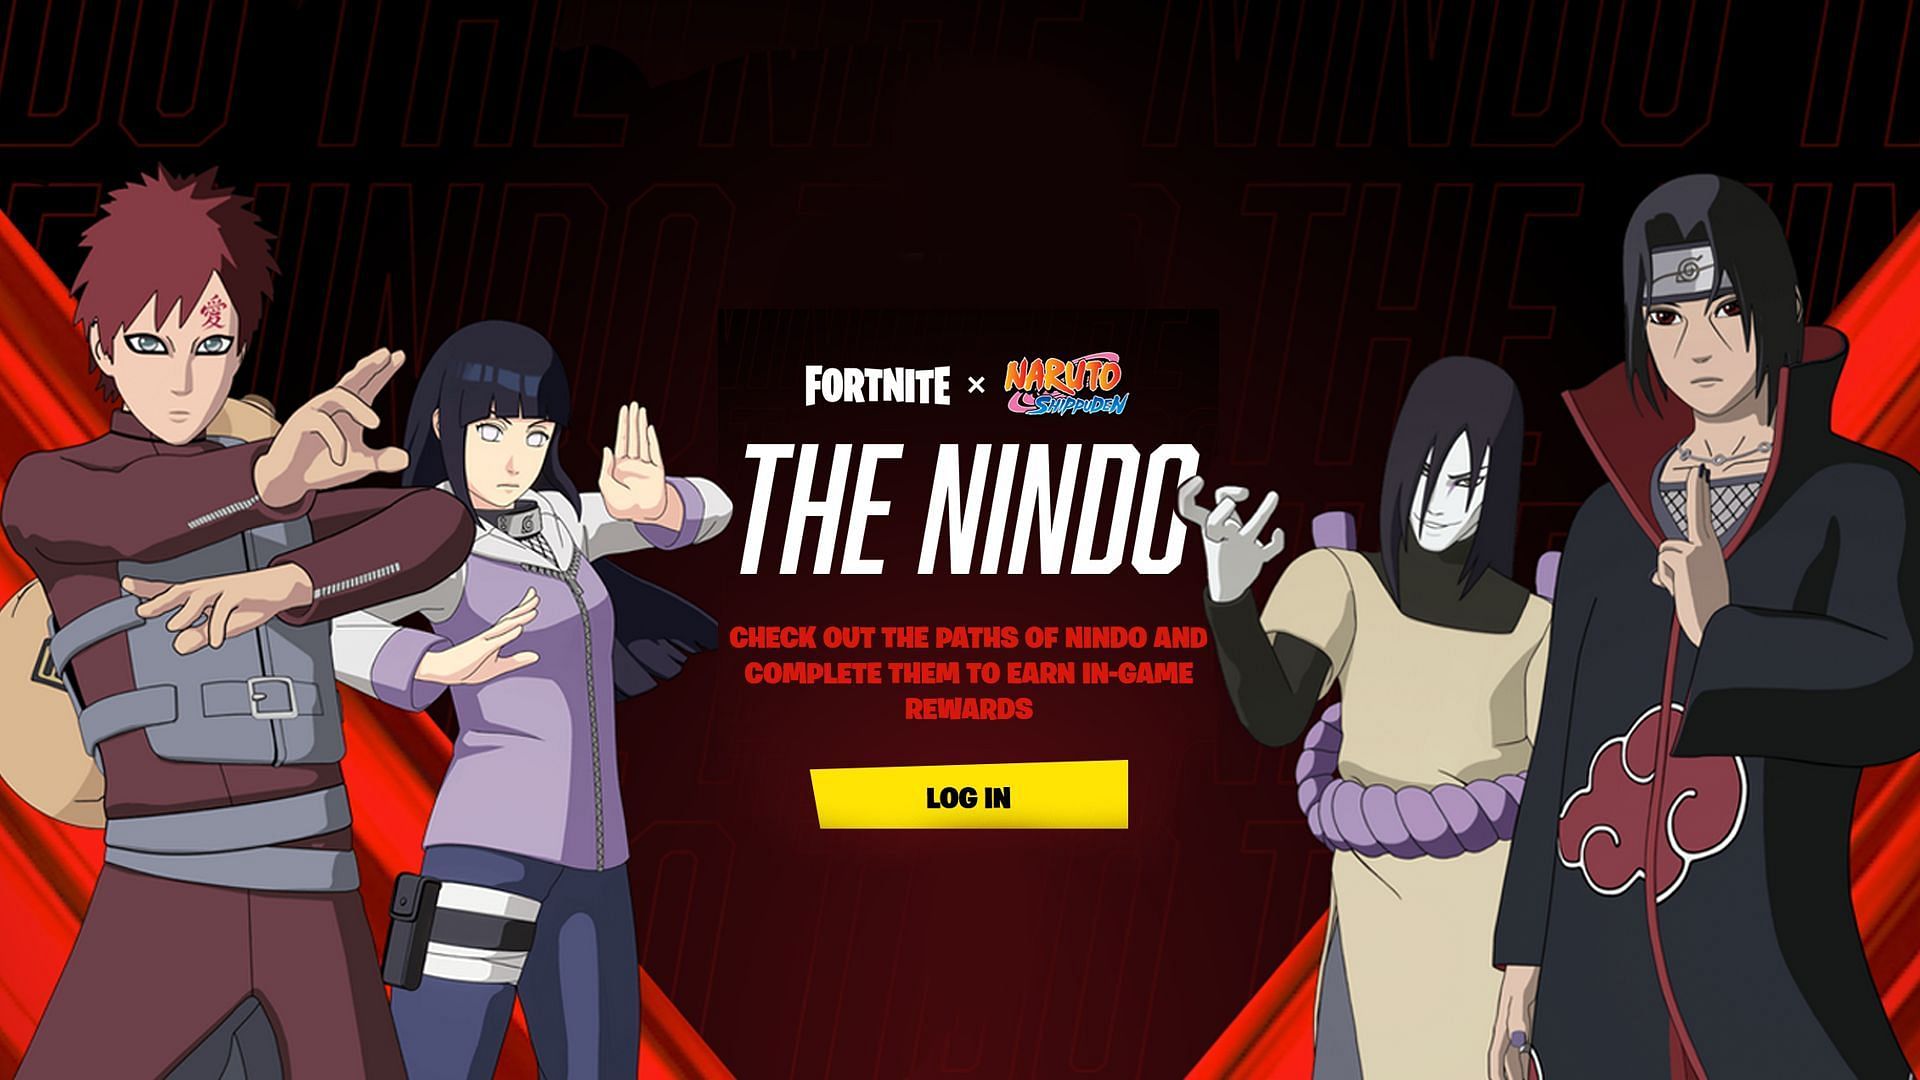 Be sure to sign up for the Nindo challenge on fortnite for the